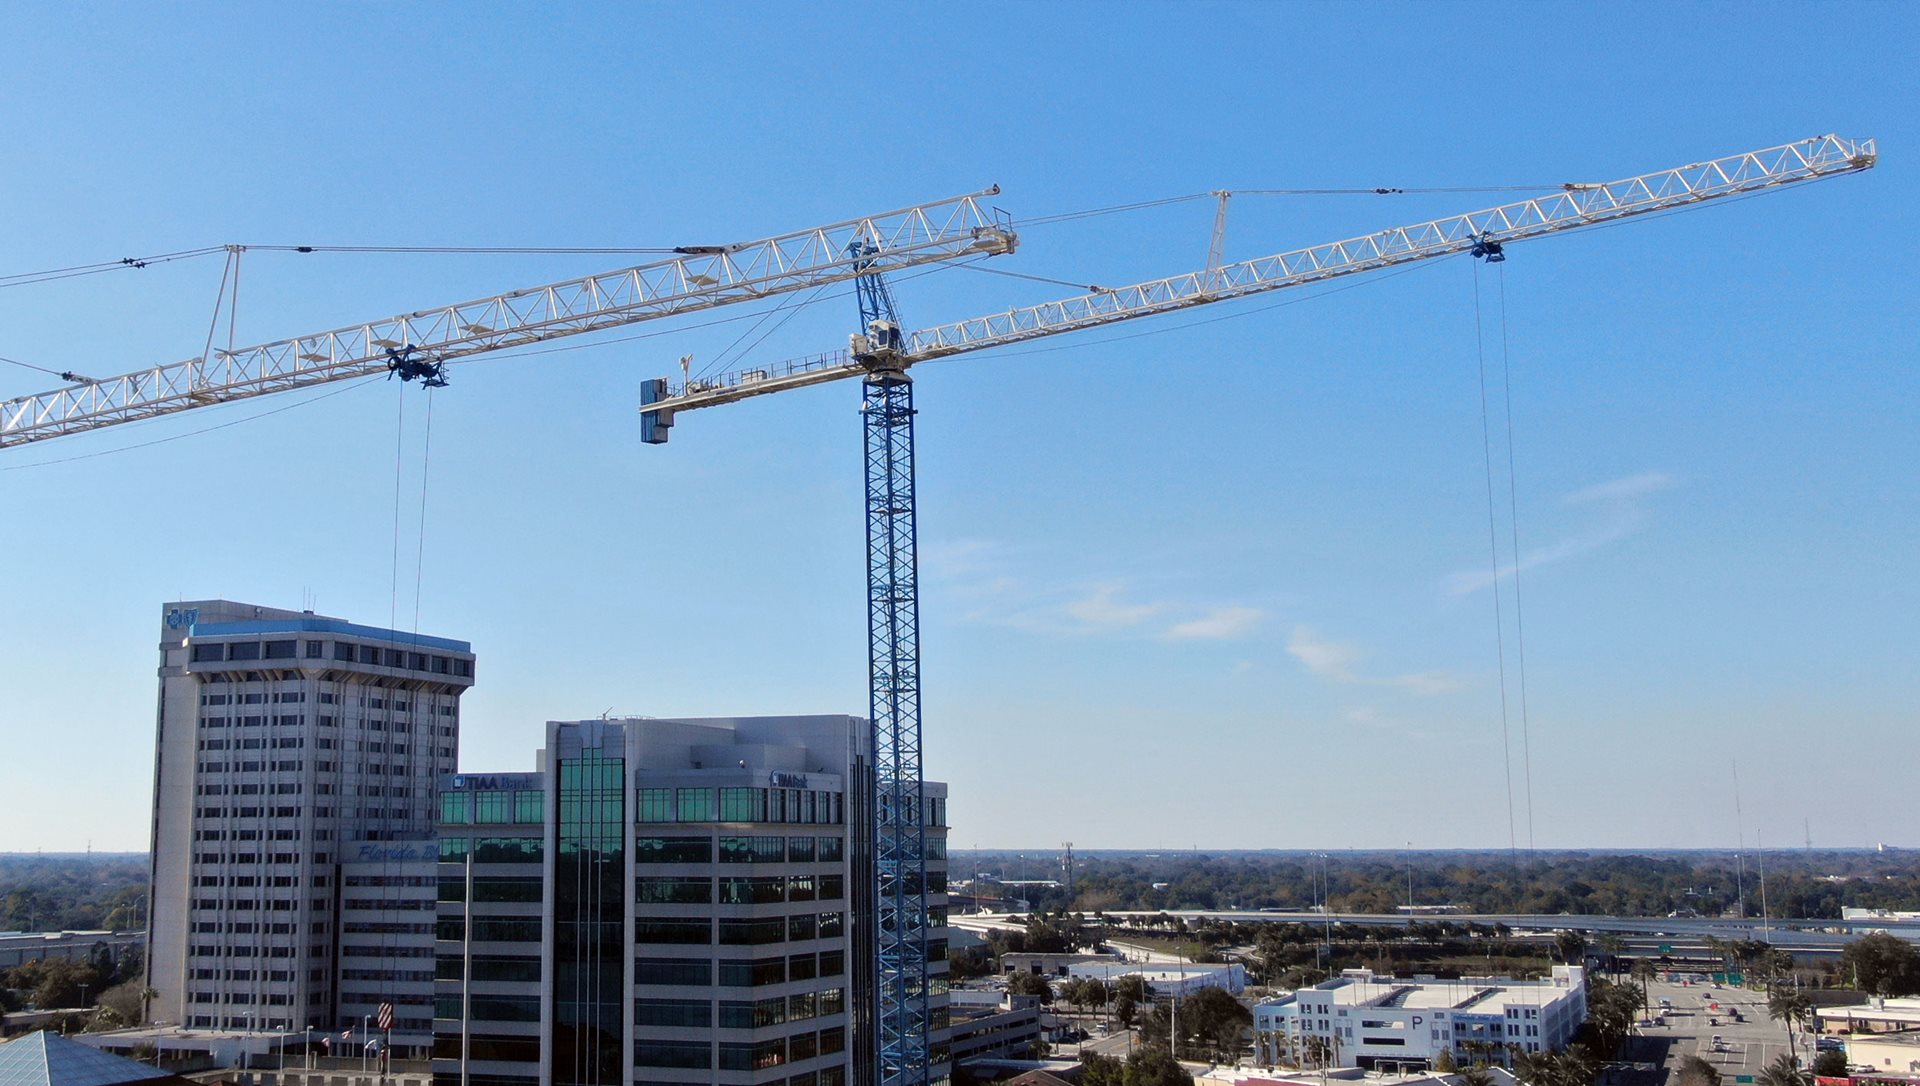 Construction cranes in Downtown Jacksonville